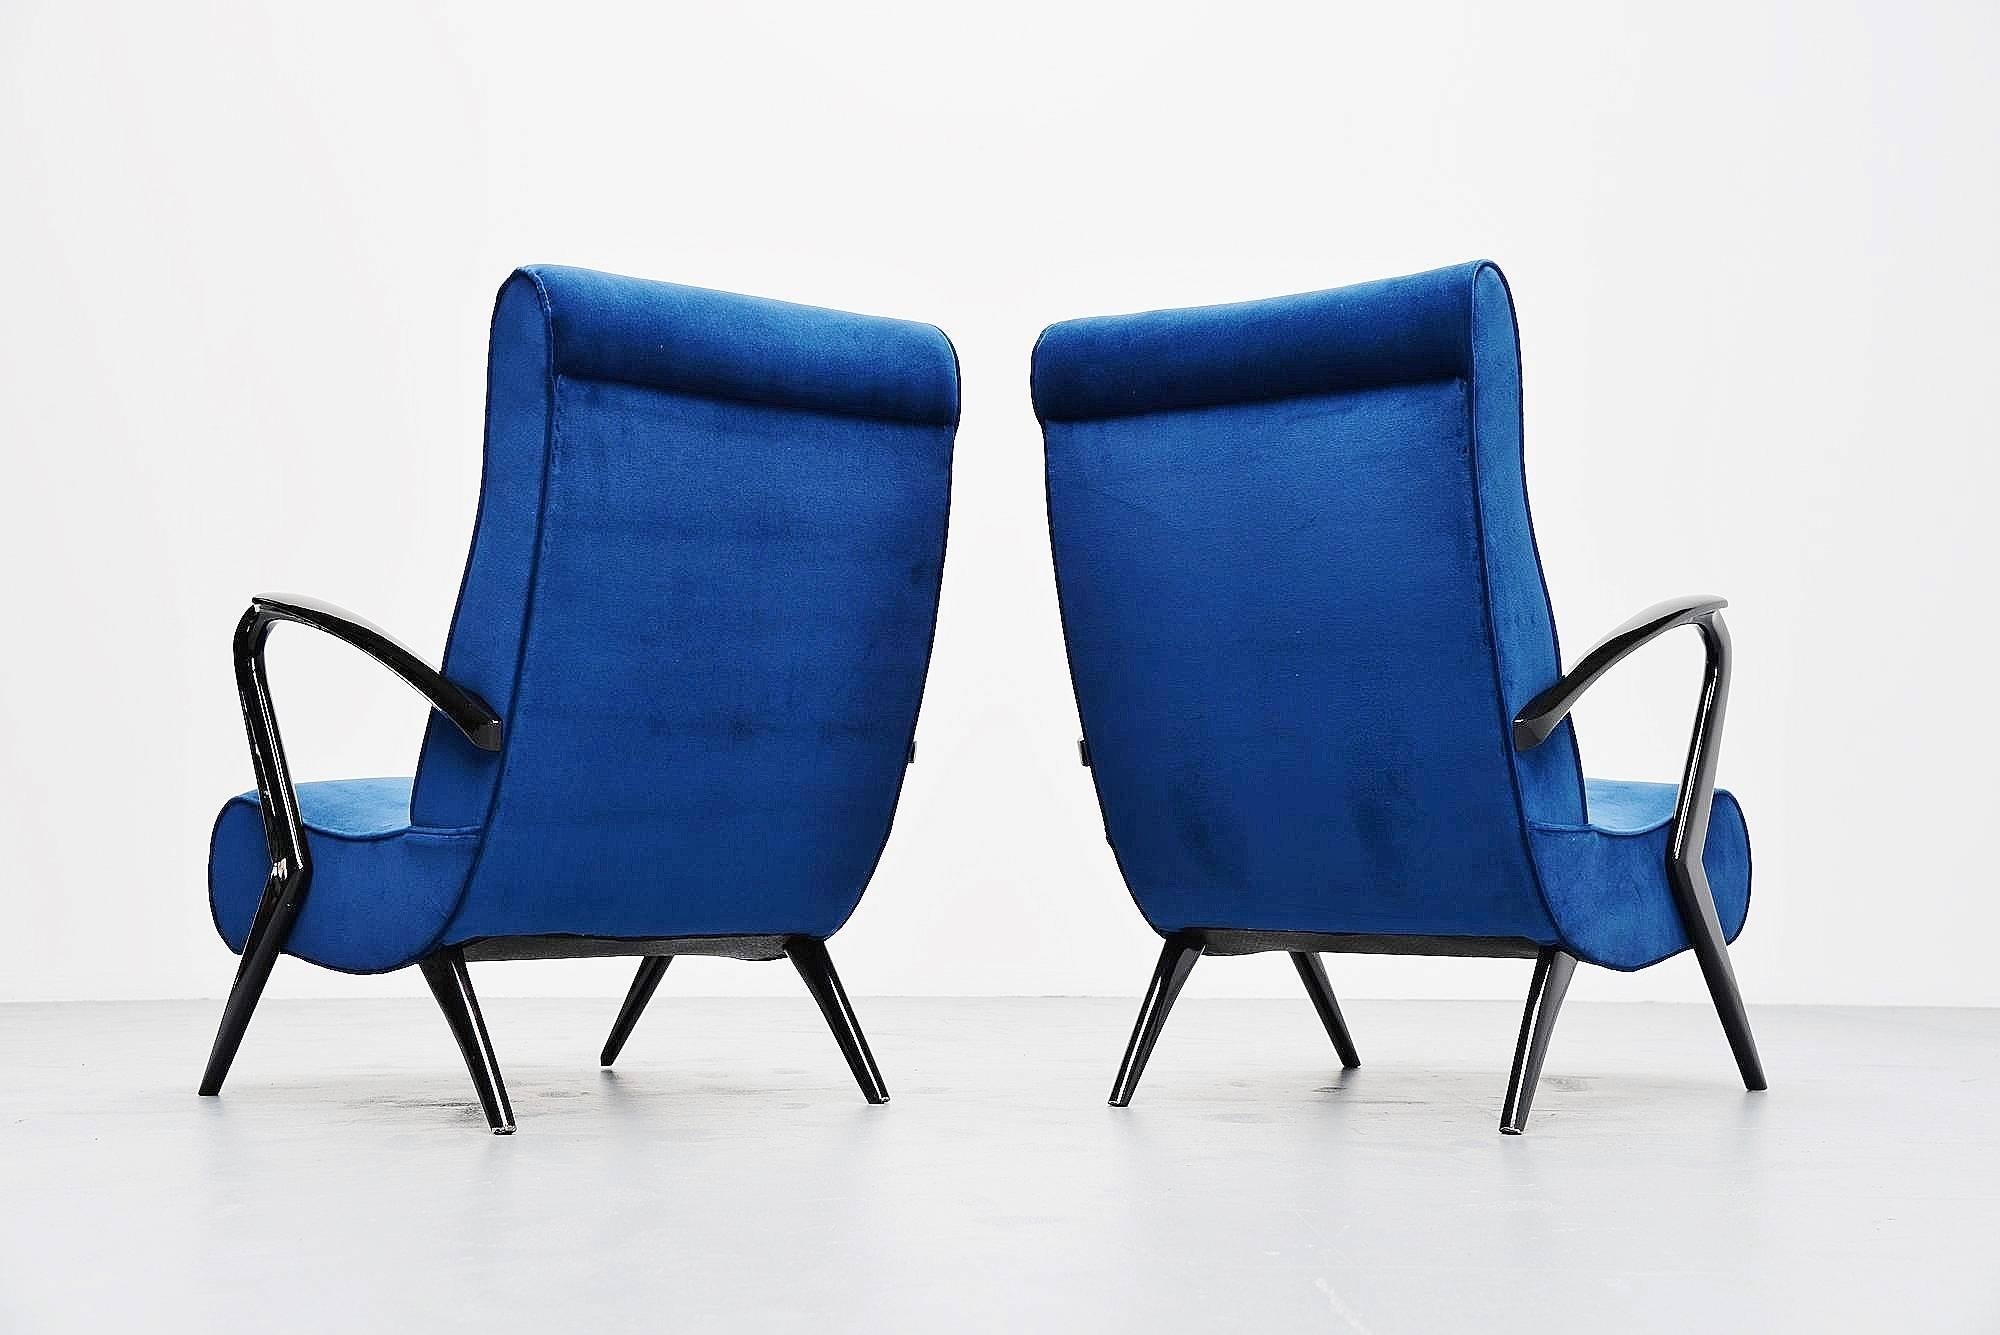 Excellent pair of lounge chairs in the manner of Gio Ponti, Italy, 1950. These chairs have high gloss black lacquered feet, newly refinished. And are upholstered in cobalt blue velvet upholstery which is very soft and great in contrast with the